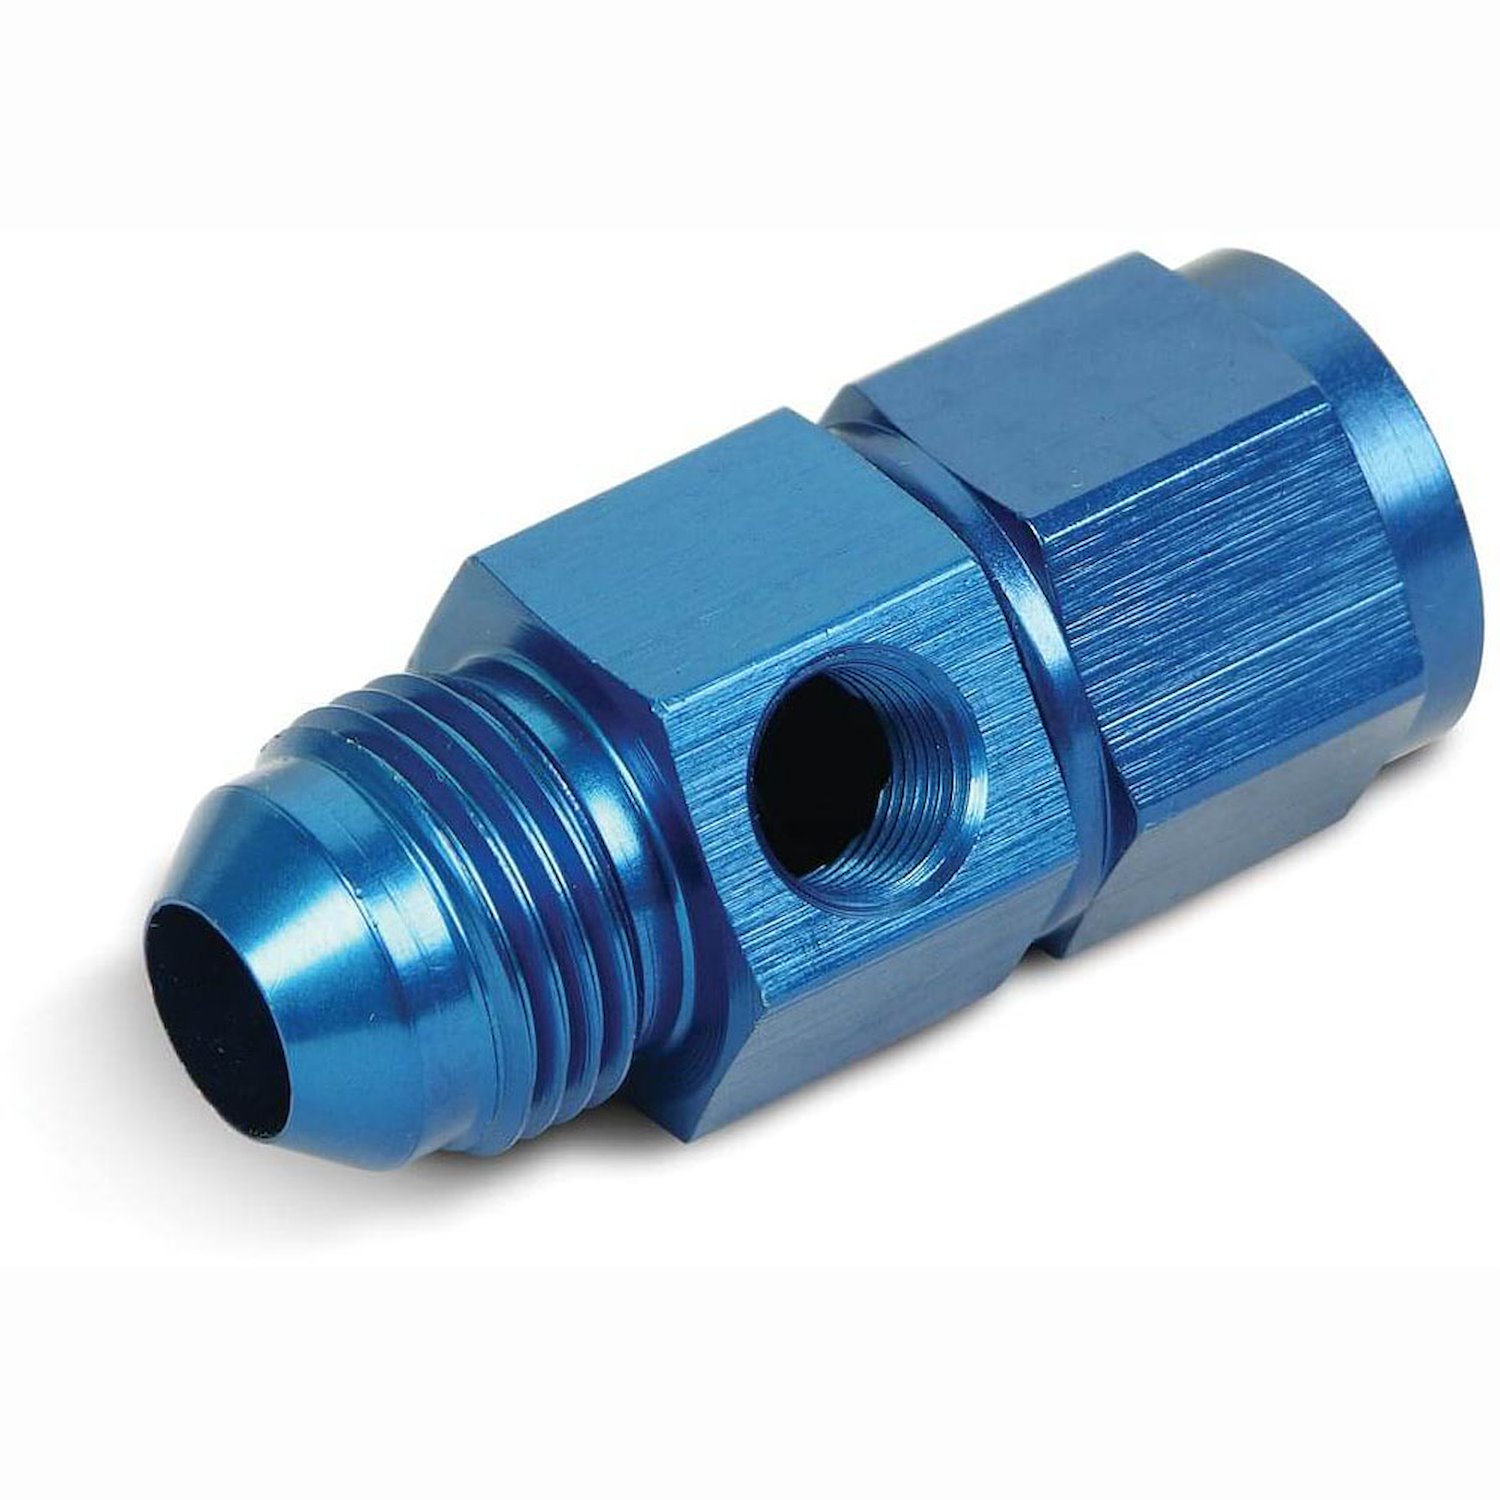 Fuel Pressure Gauge Adapter Fitting [-8 AN Male to -8 AN Female 1/8 in. NPT]